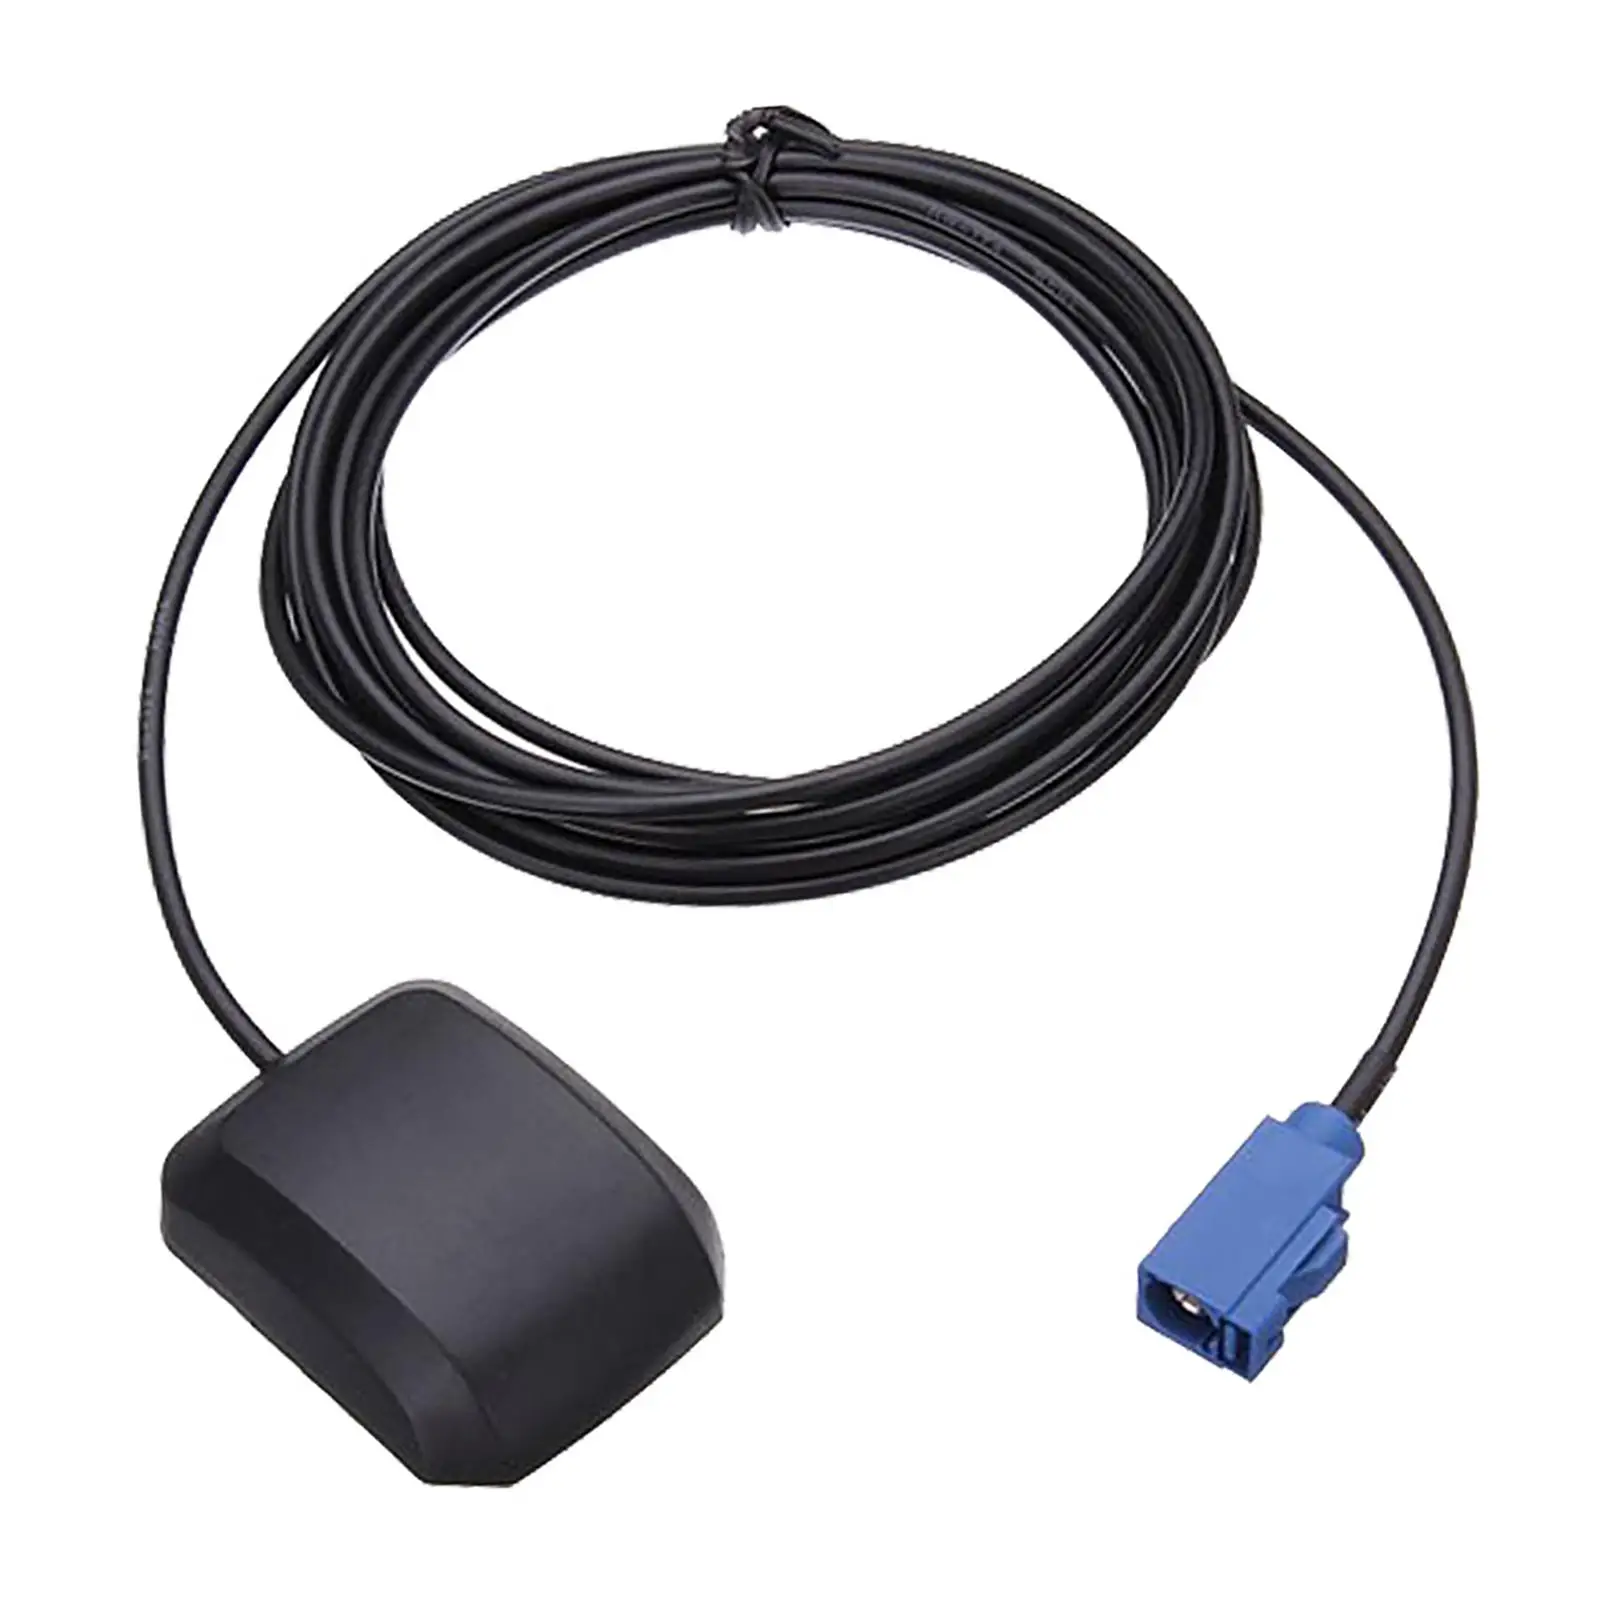 Vehicle Active Navigation with C Male Connector for Car Truck SUV Stereo 